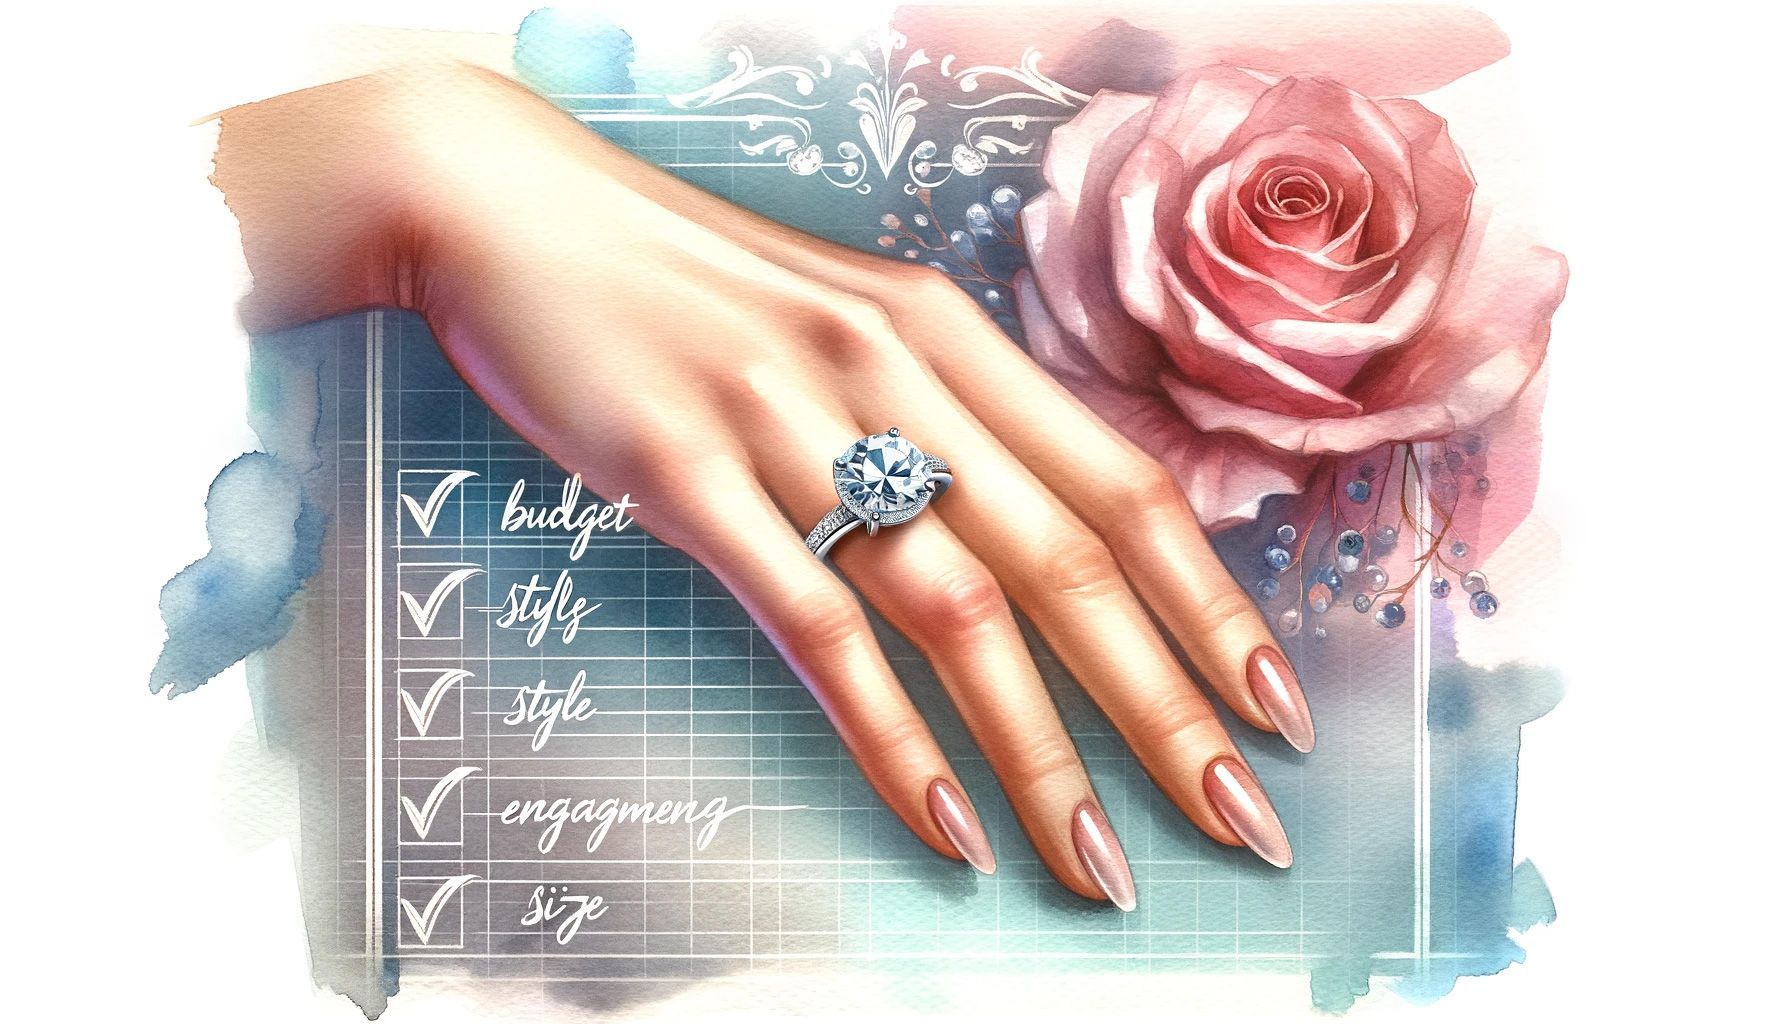 Top 3 Tips for Buying an Engagement Ring